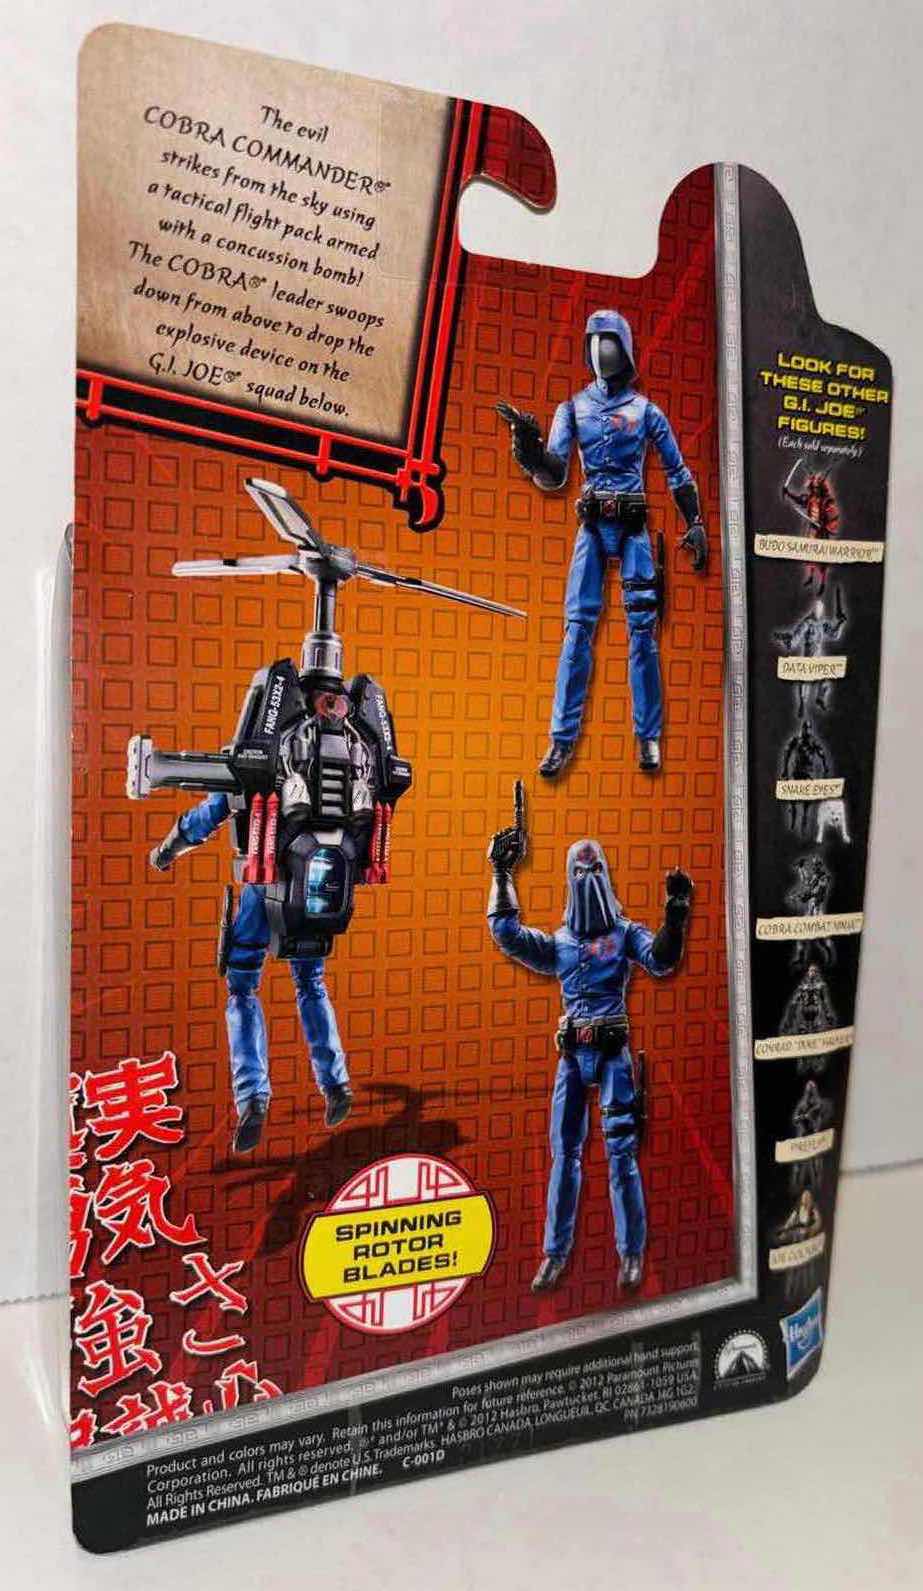 Photo 3 of NEW HASBRO G.I. JOE RETALIATION ACTION FIGURE & ACCESSORIES “COBRA COMMANDER” IN PROTECTIVE CLEAR CLAMSHELL CASE